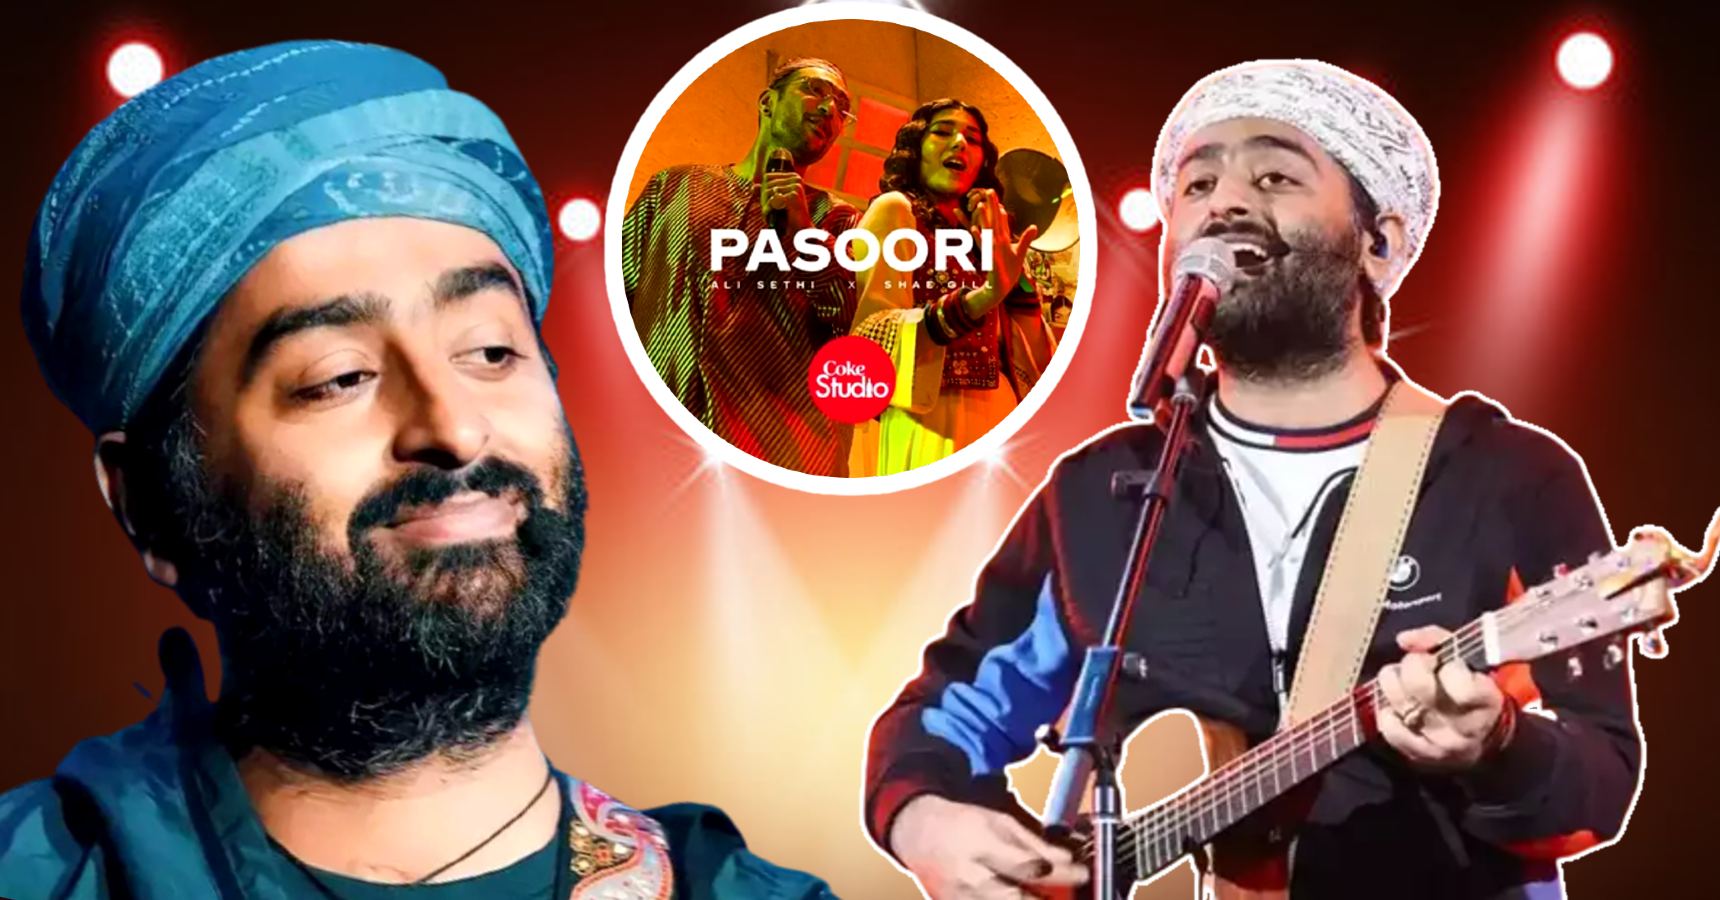 Arijit Singh opens up about social media trolling on Pasuri song